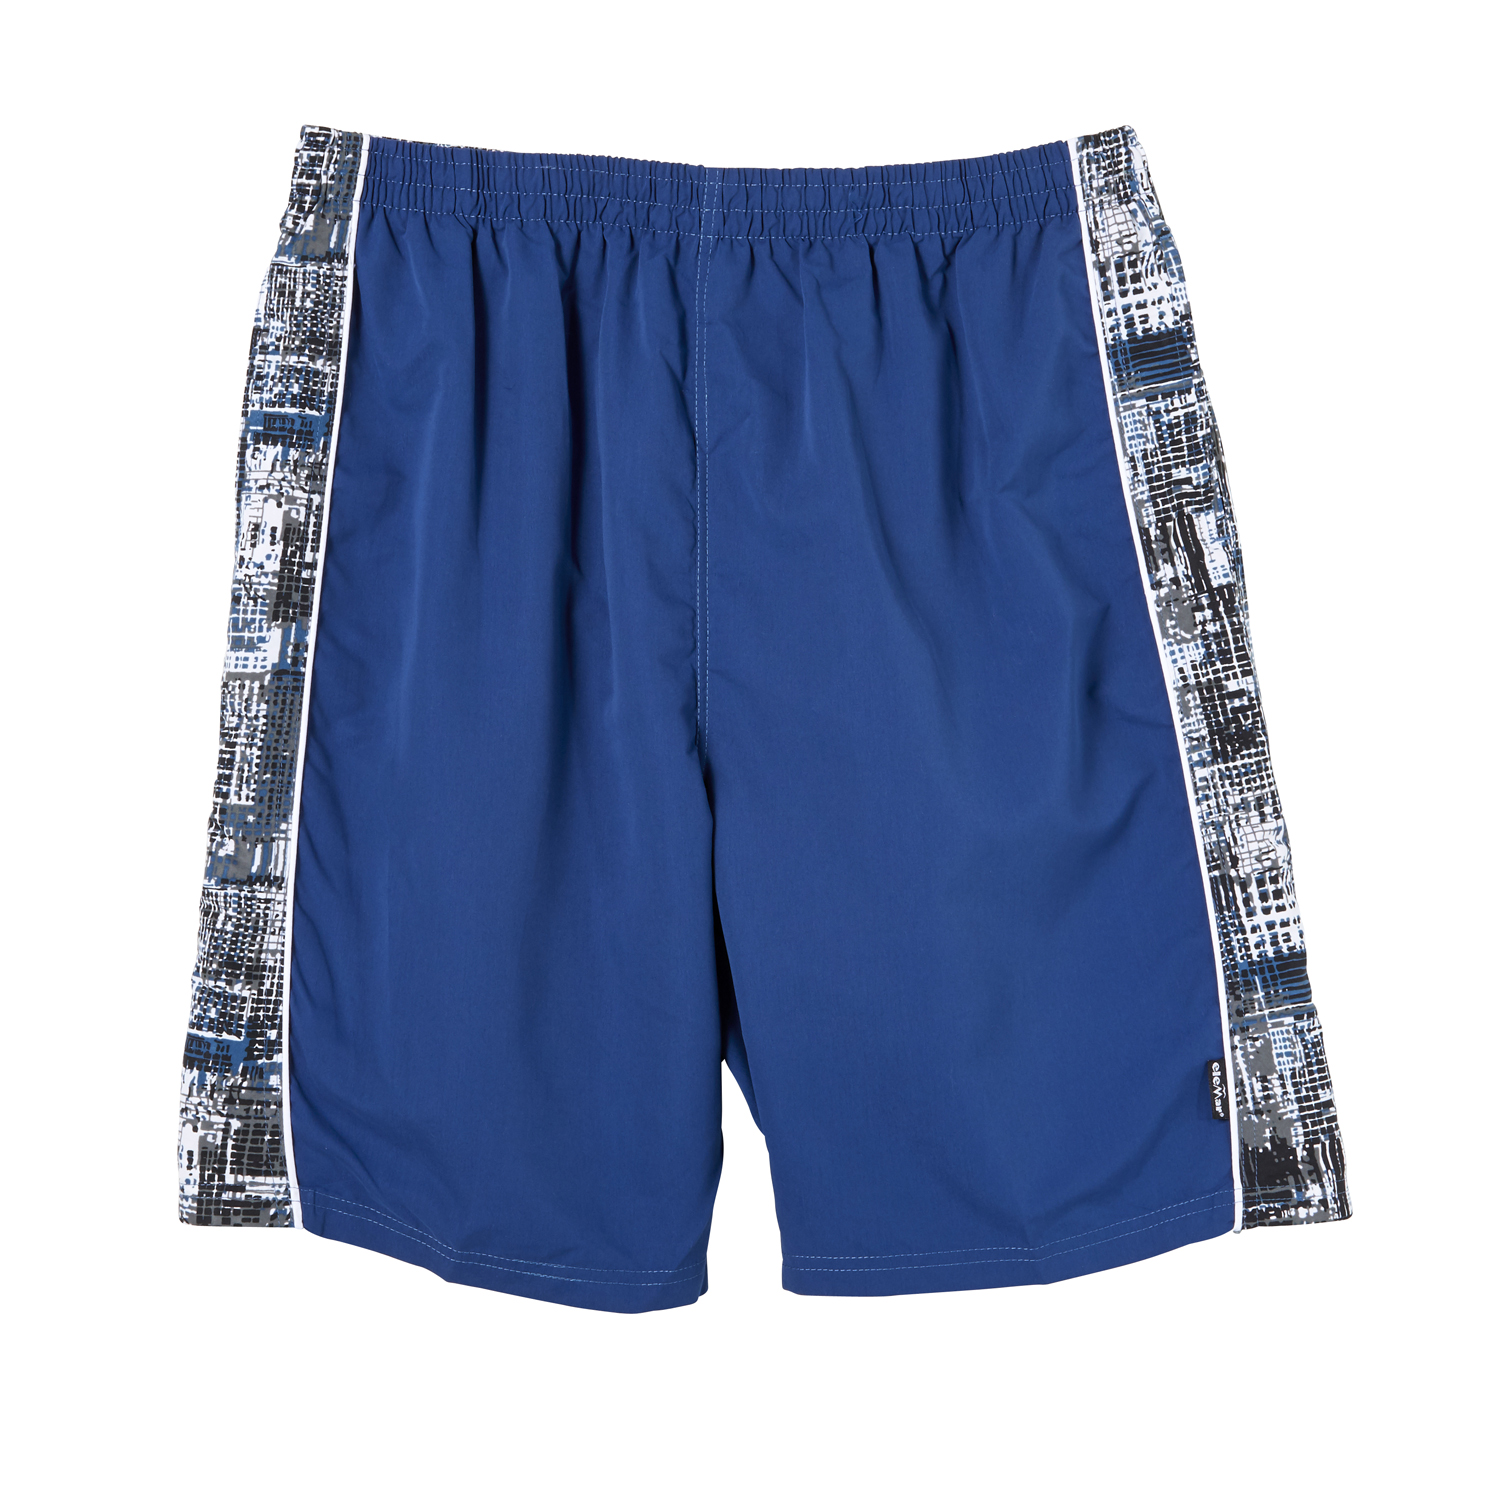 Swim bermudas in royal blue by eleMar up to oversize 10XL